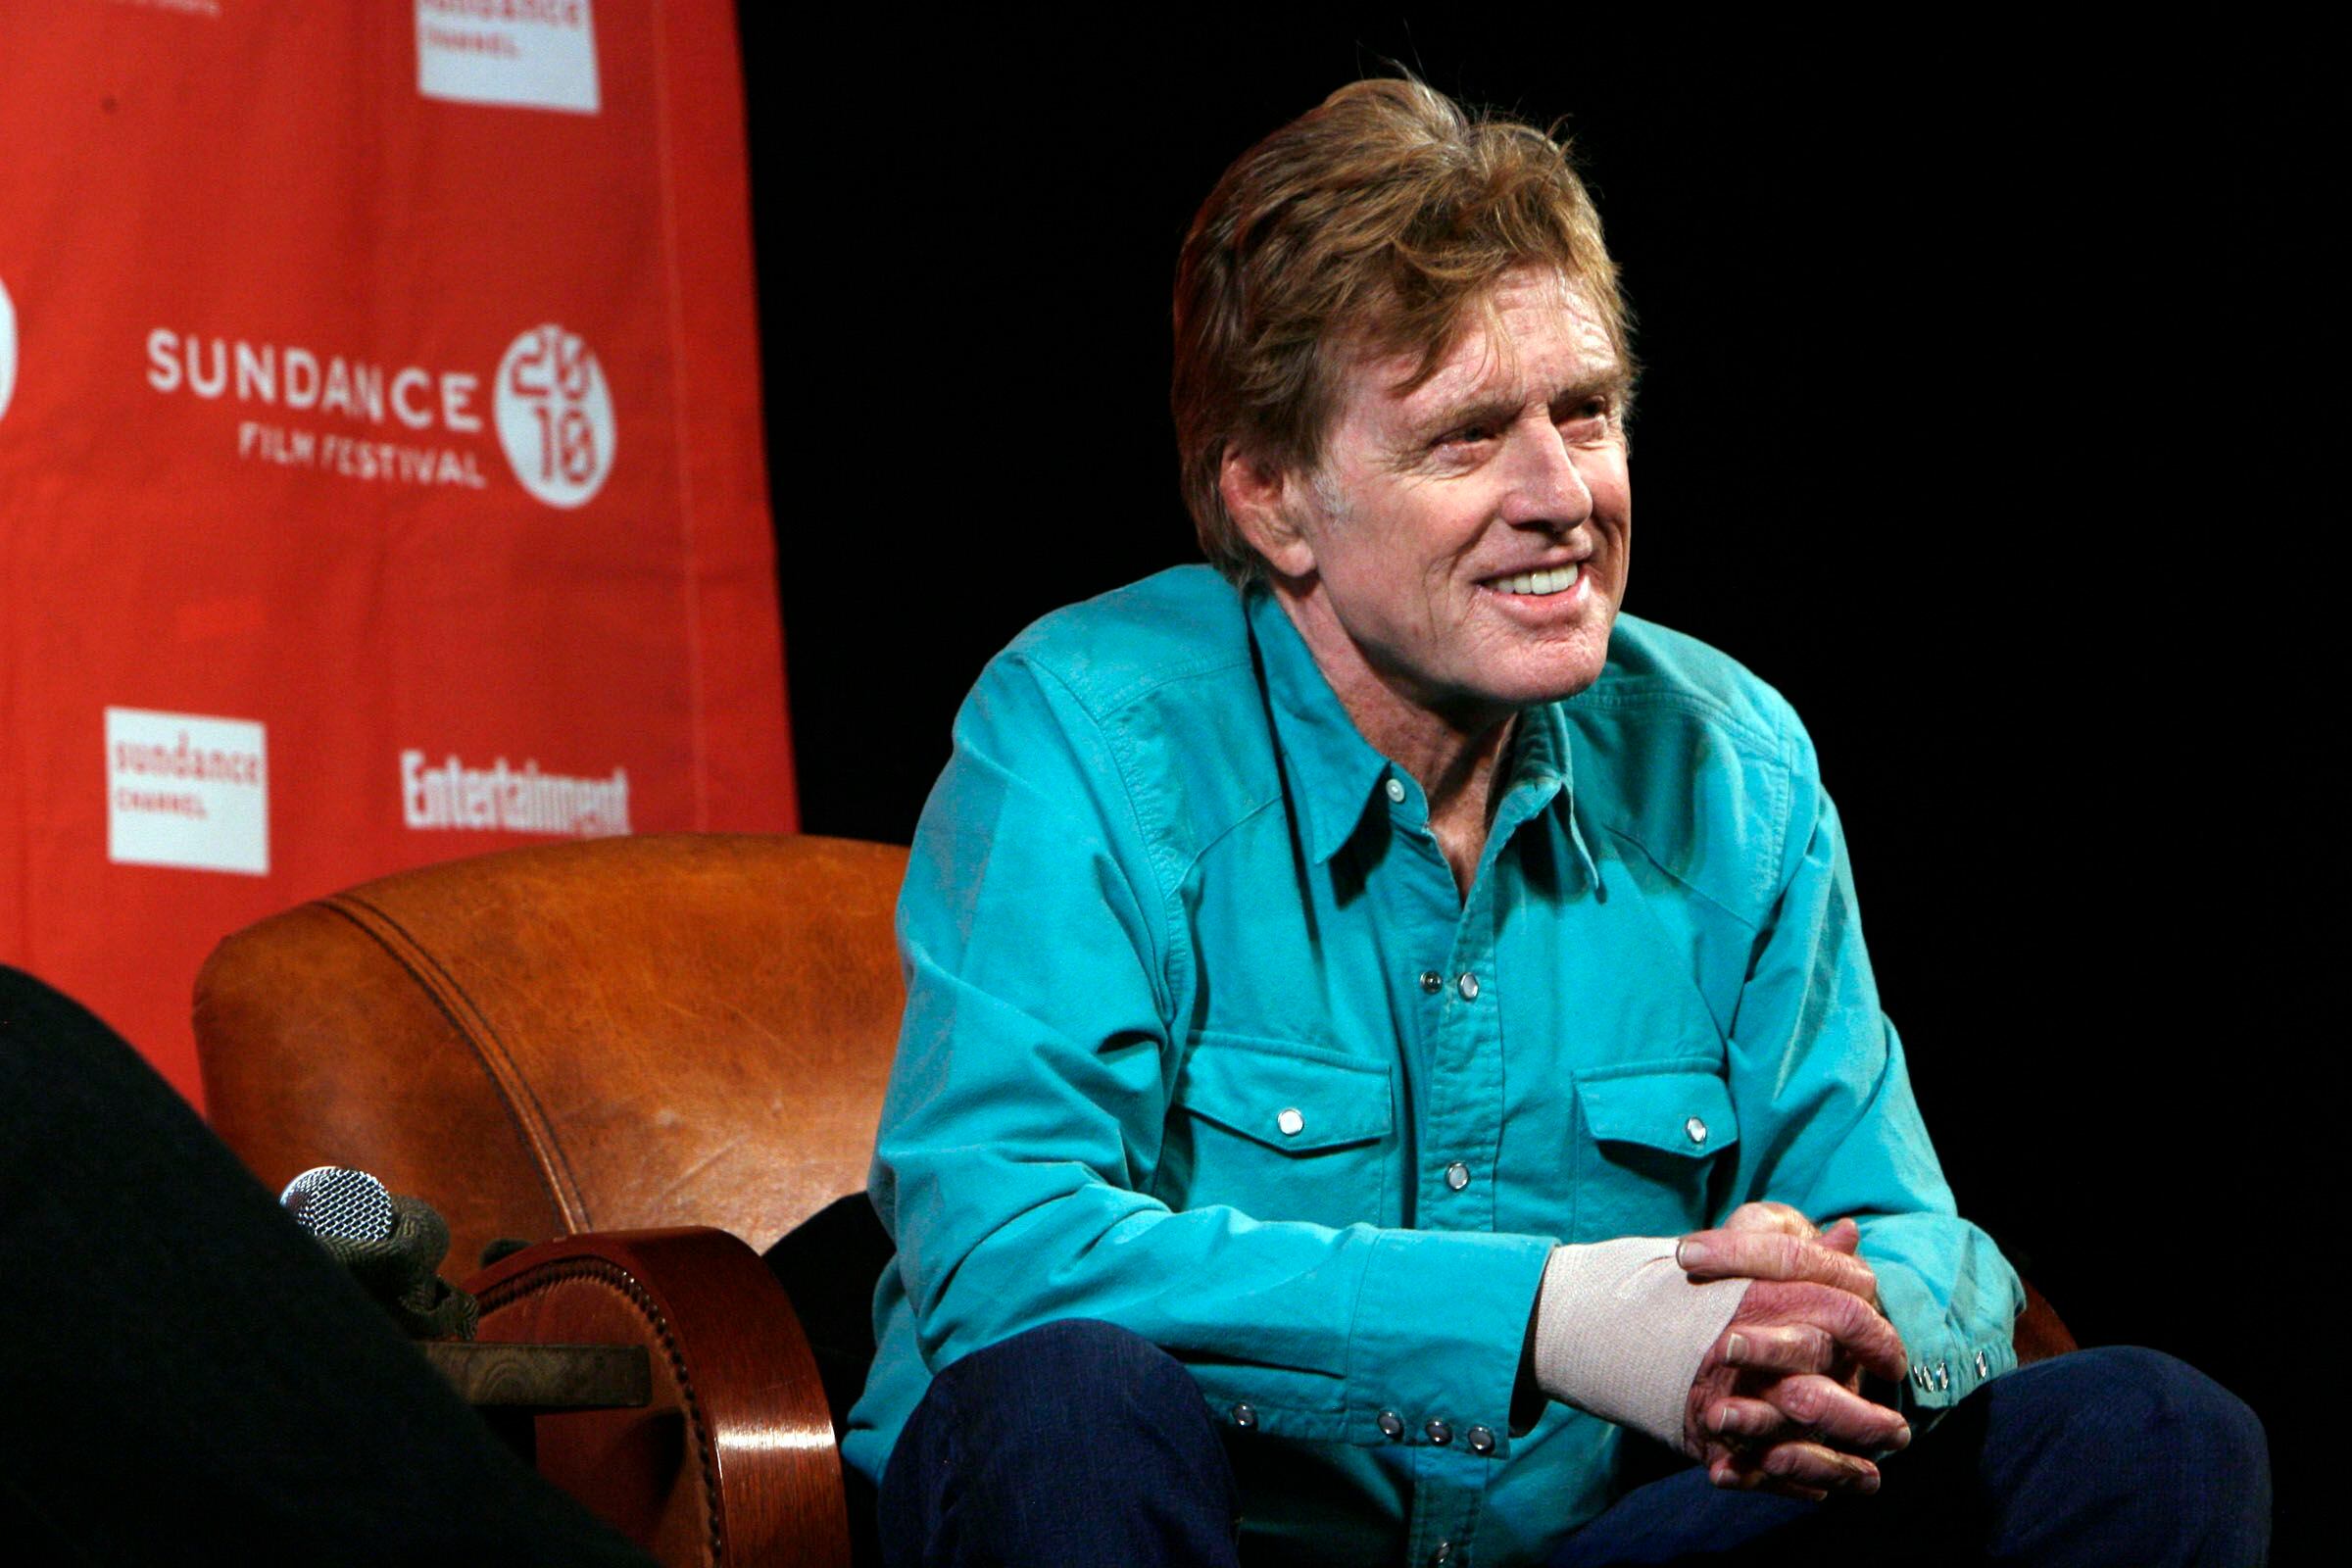 (Francisco Kjolseth  |  Salt Lake Tribune file photo) Robert Redford, seated alongside festival director John Cooper, answers questions from the media at the Egyptian Theatre as the Sundance Film Festival gets underway in Park City on Thursday, Jan. 21, 2010.